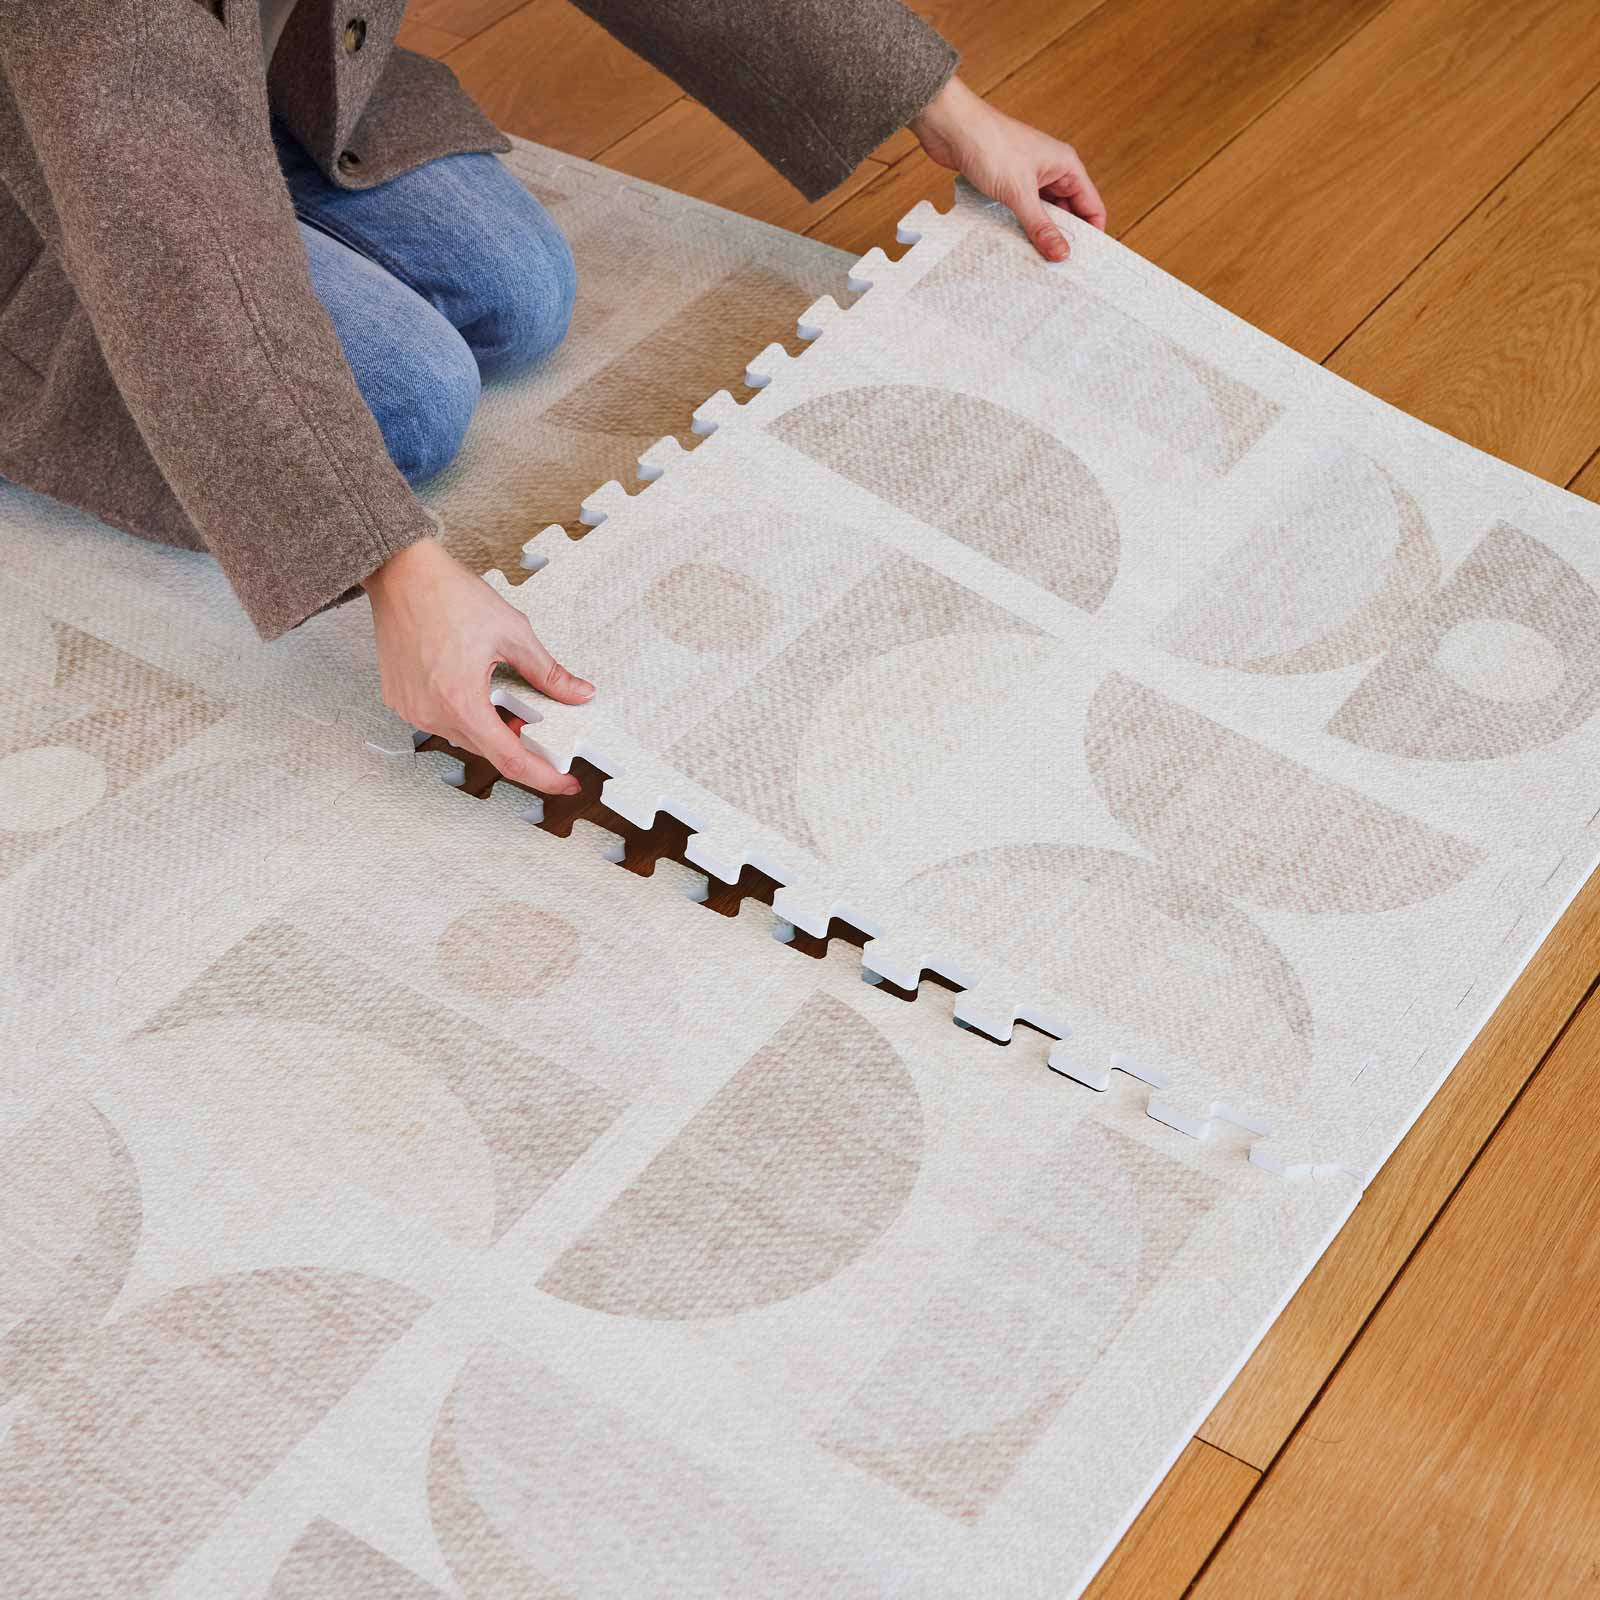 Luna sandstone neutral geometric print play mat on wooden floors with woman putting the corner tile in place